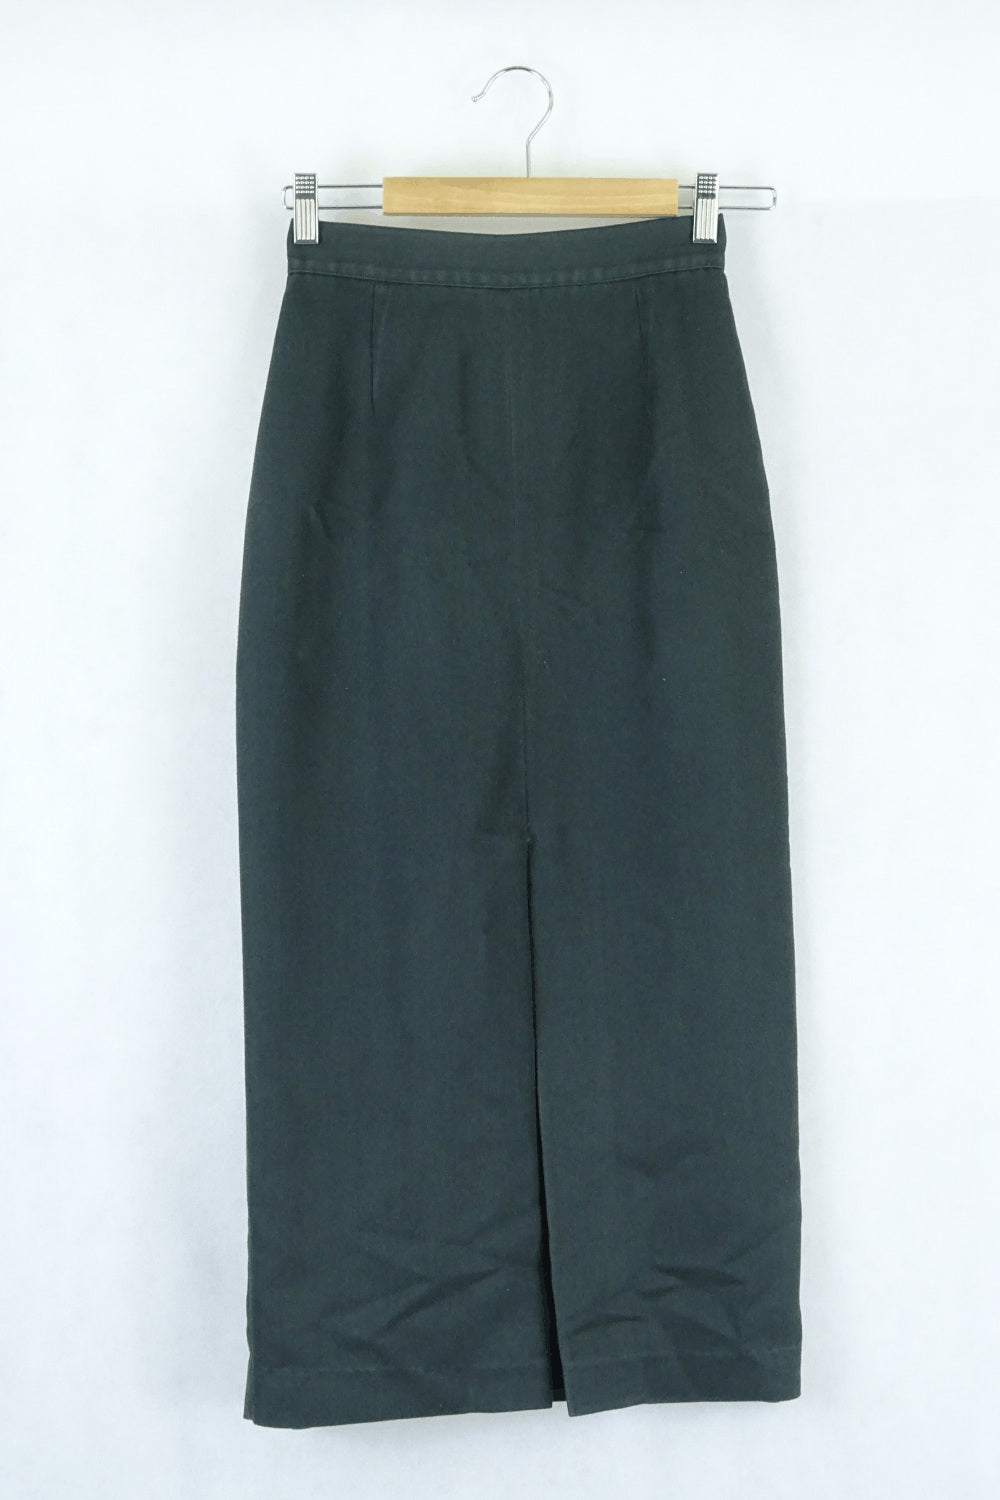 The Other Side Green Skirt 8